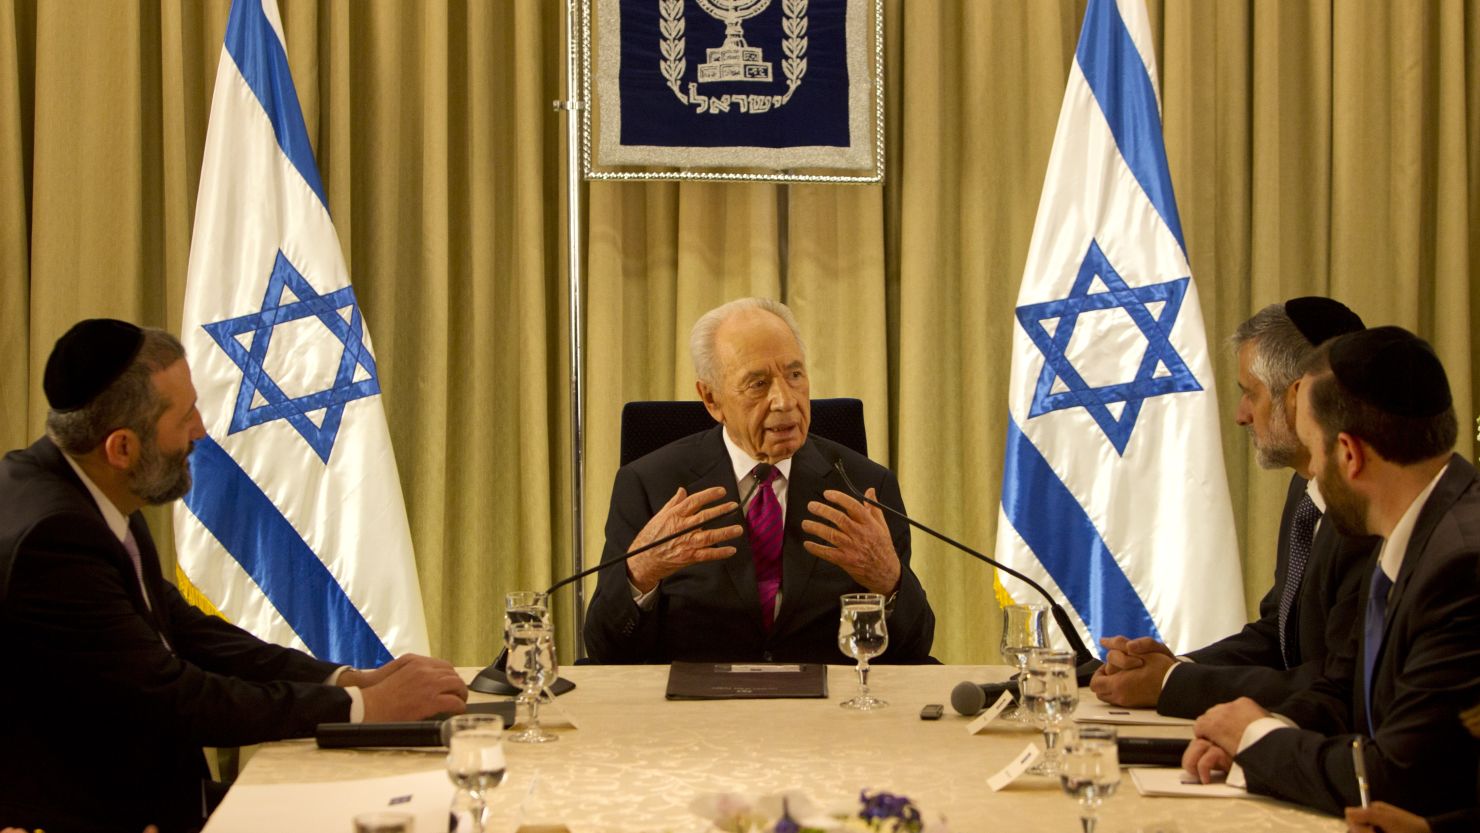 President Shimon Peres (C) sits with Shas Party leaders at the President's residence on  January 31, 2013, Jerusalem.